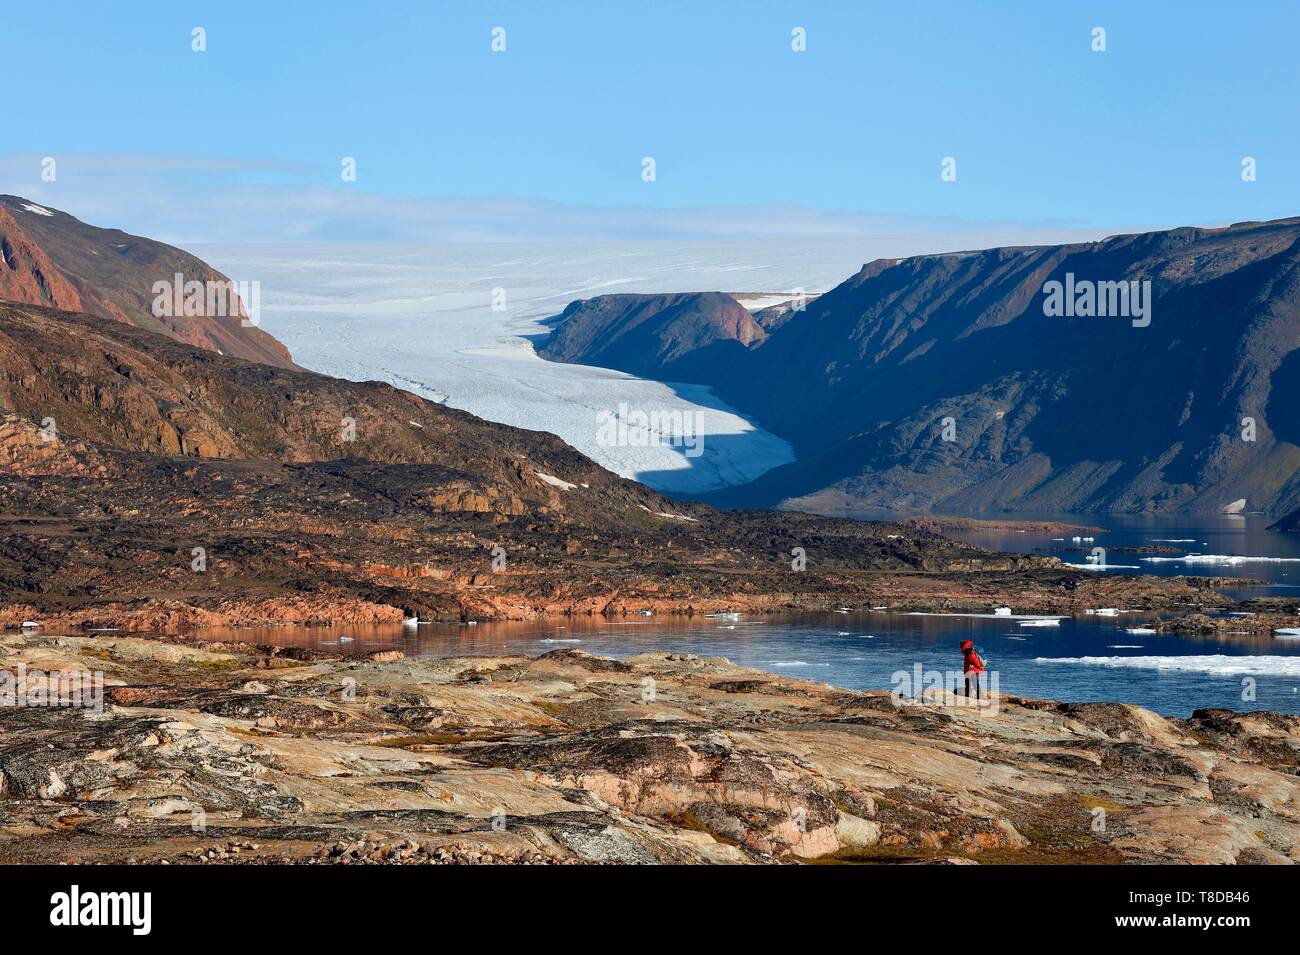 Greenland, North West coast, Smith sound north of Baffin Bay, Inglefield Land, site of Etah, today abandoned Inuit camp that served as a base for several polar expeditions Stock Photo